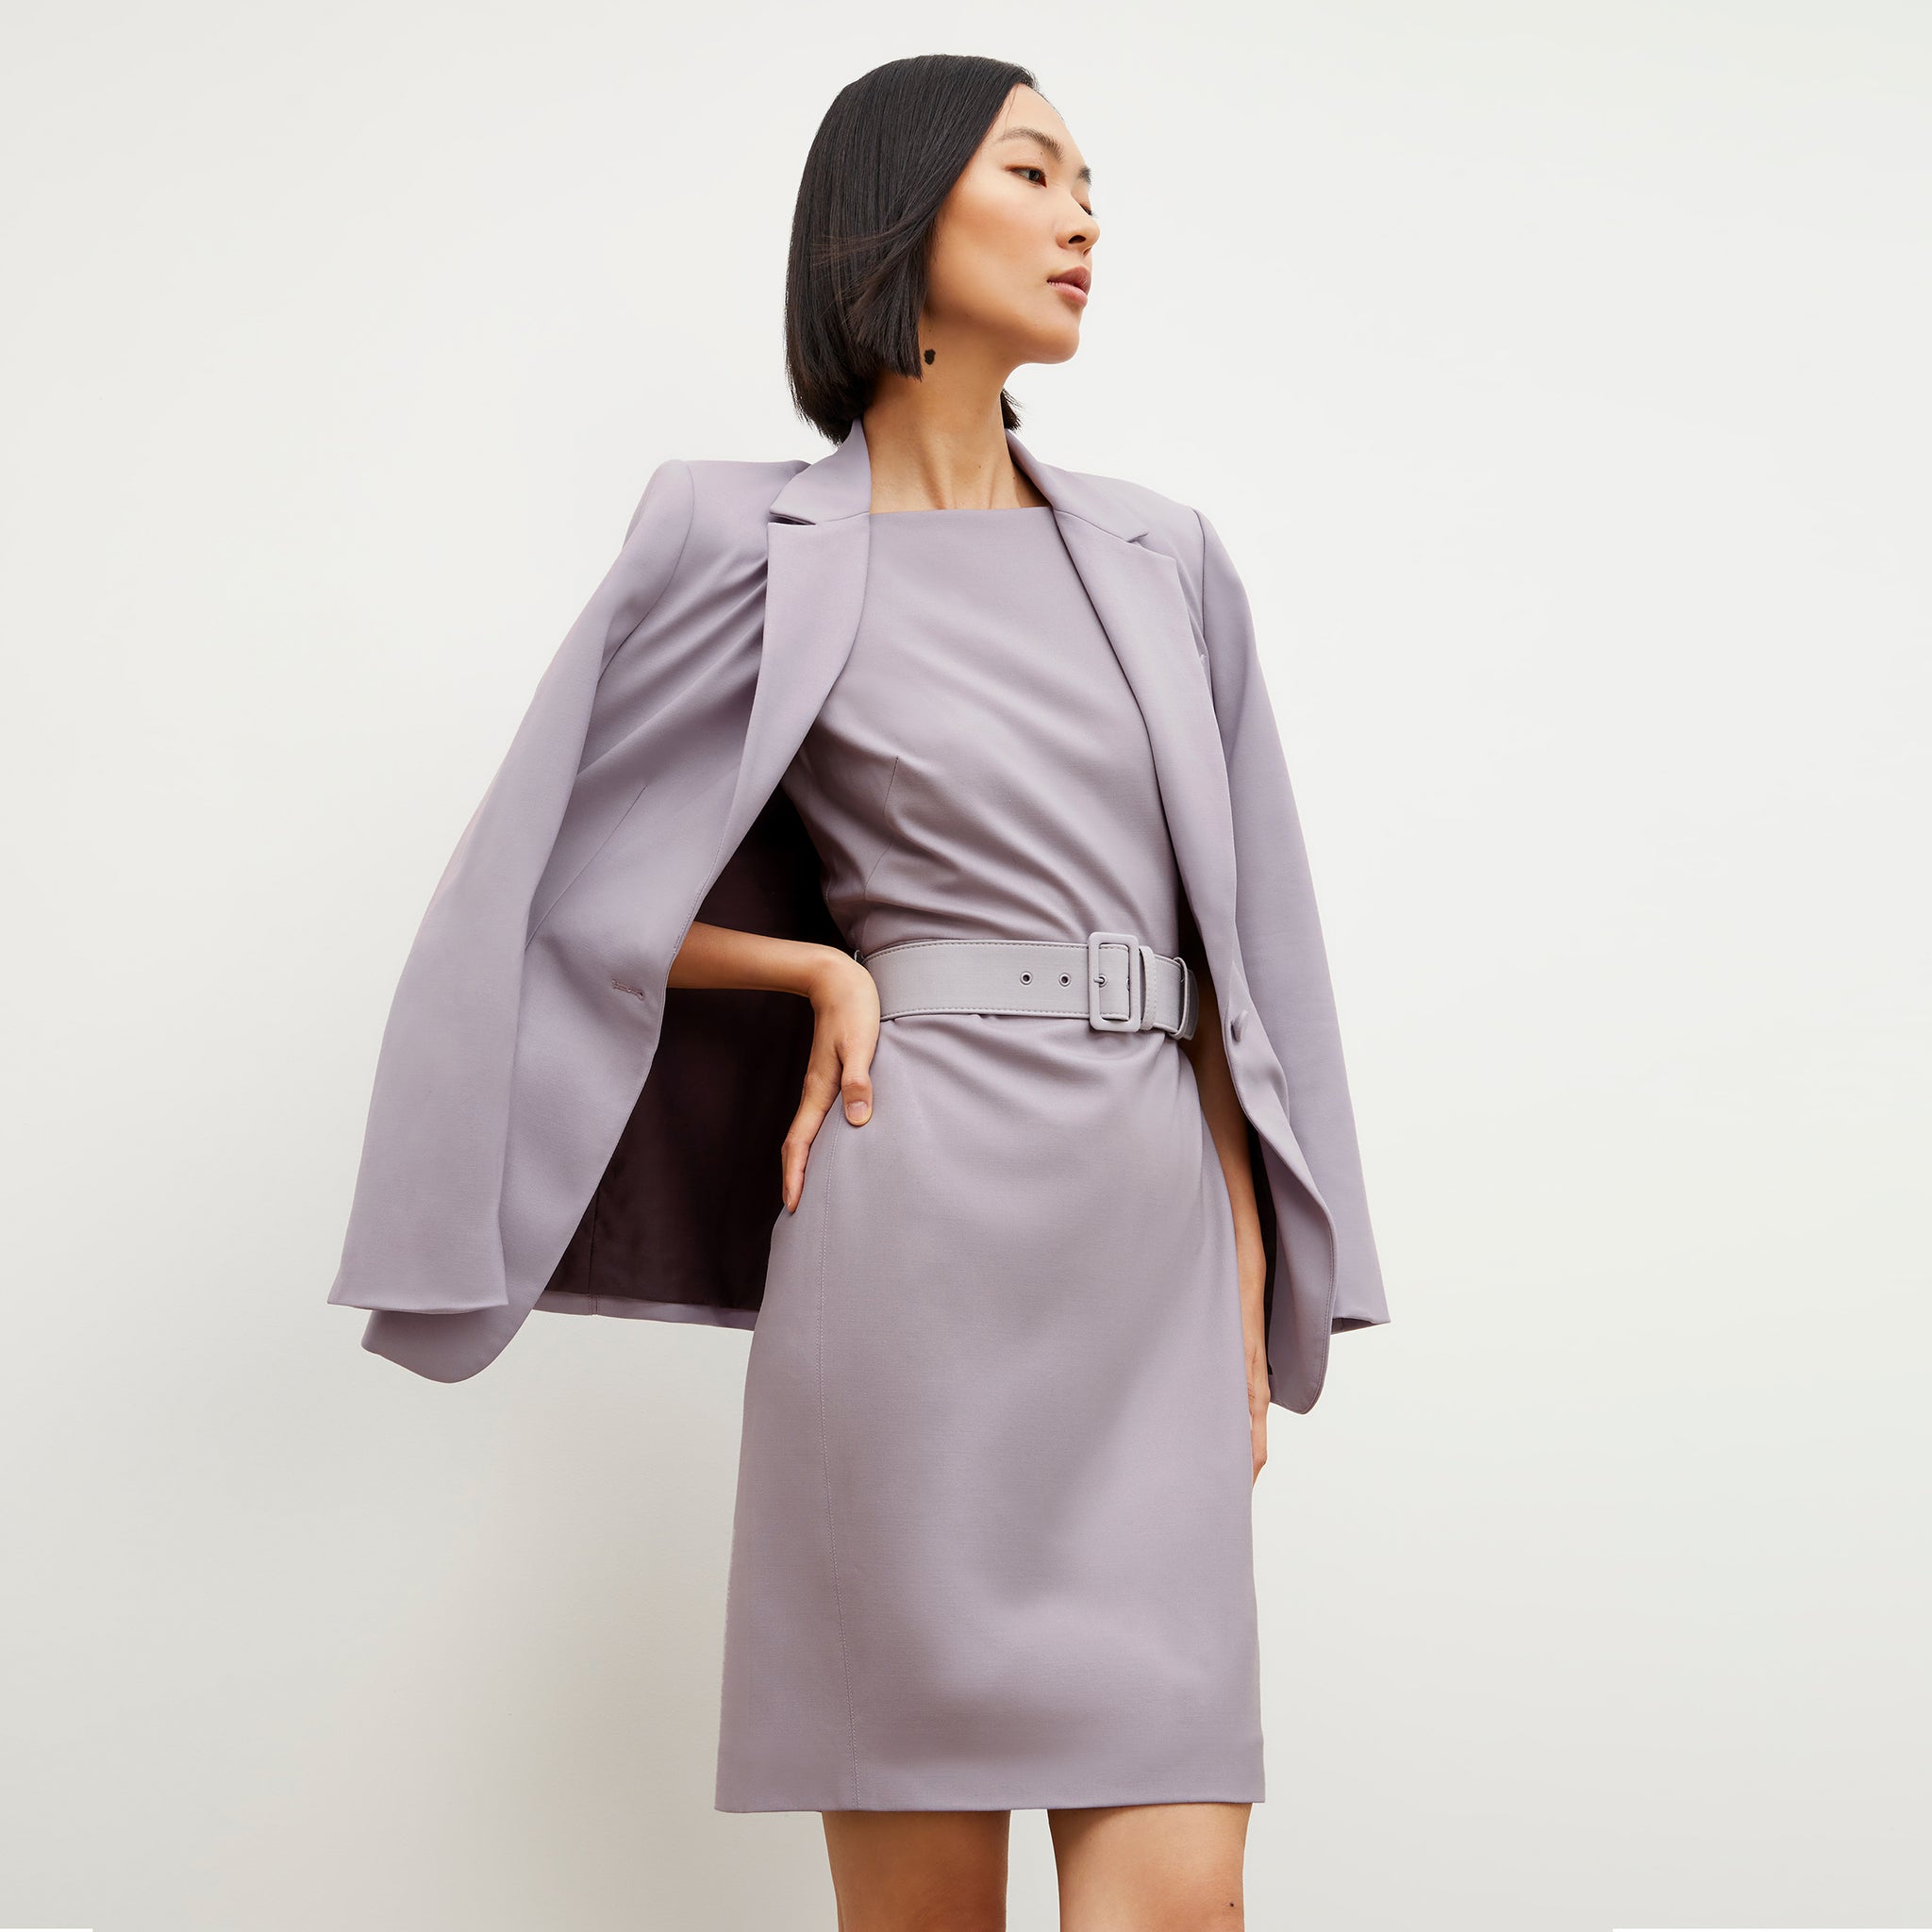 Front image of a woman wearing the Yiyan Blazer - Wool Twill in Light Lilac